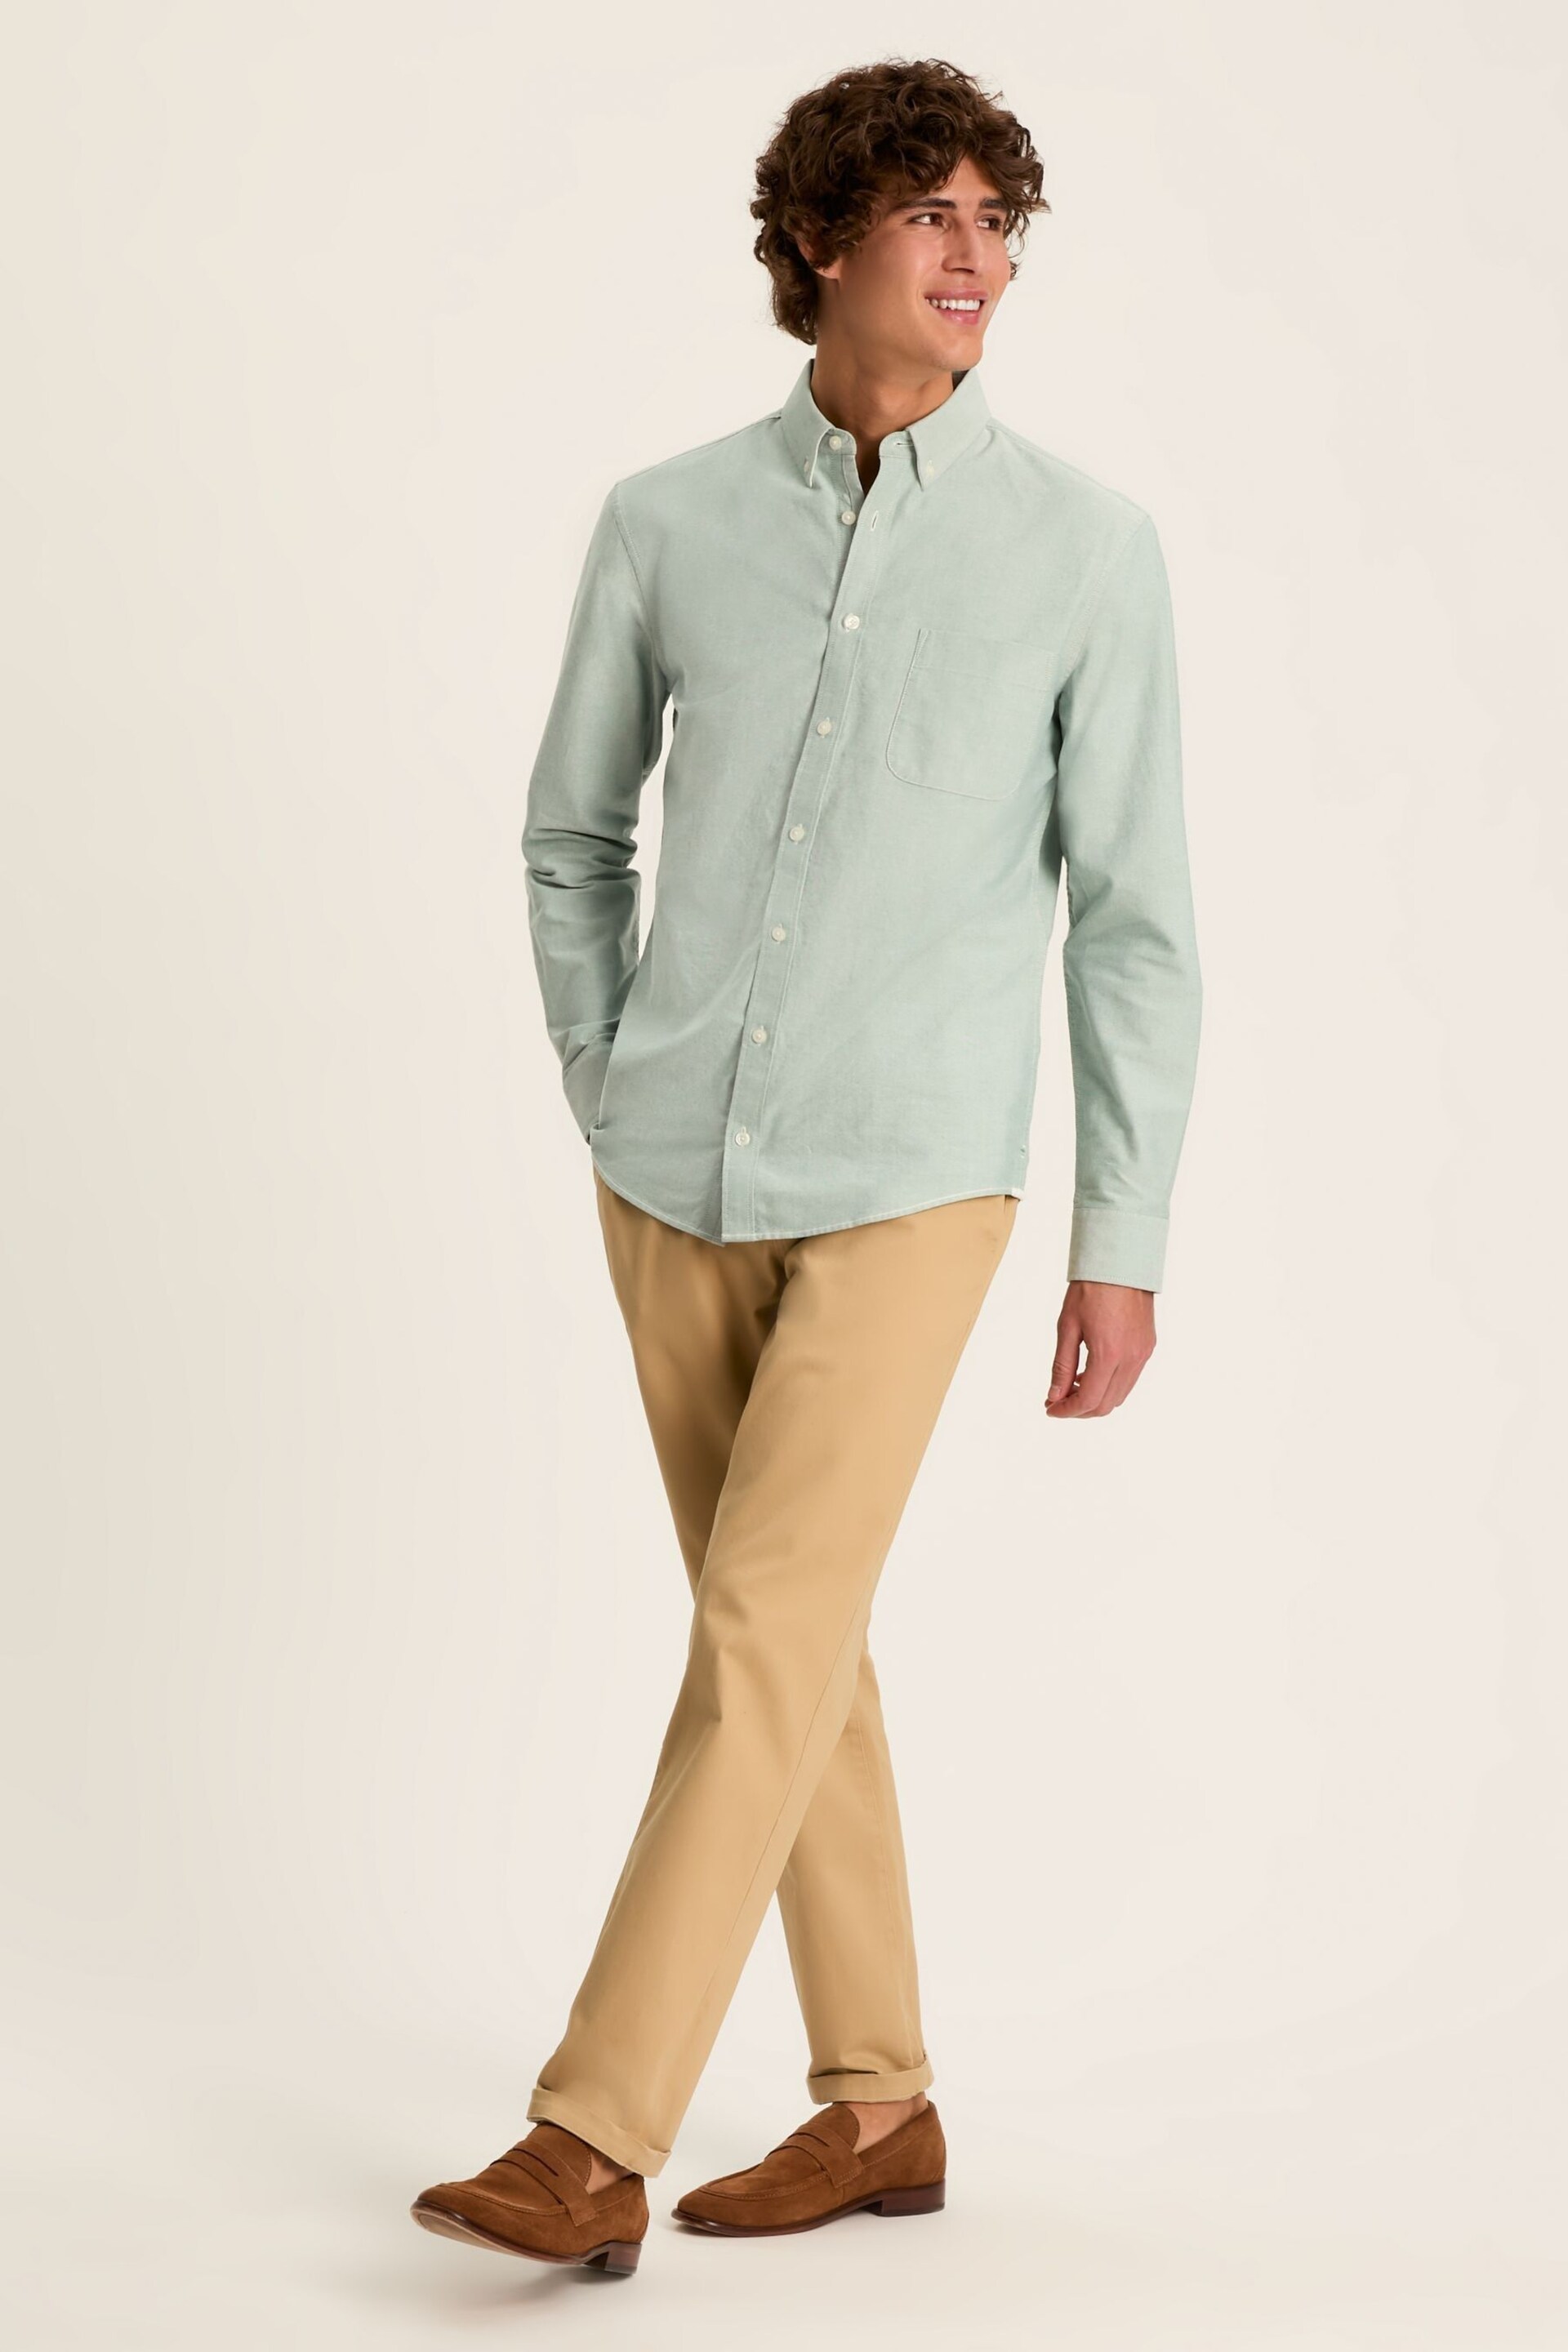 Joules Oxford Sage Green Classic Fit Shirt - Image 4 of 12